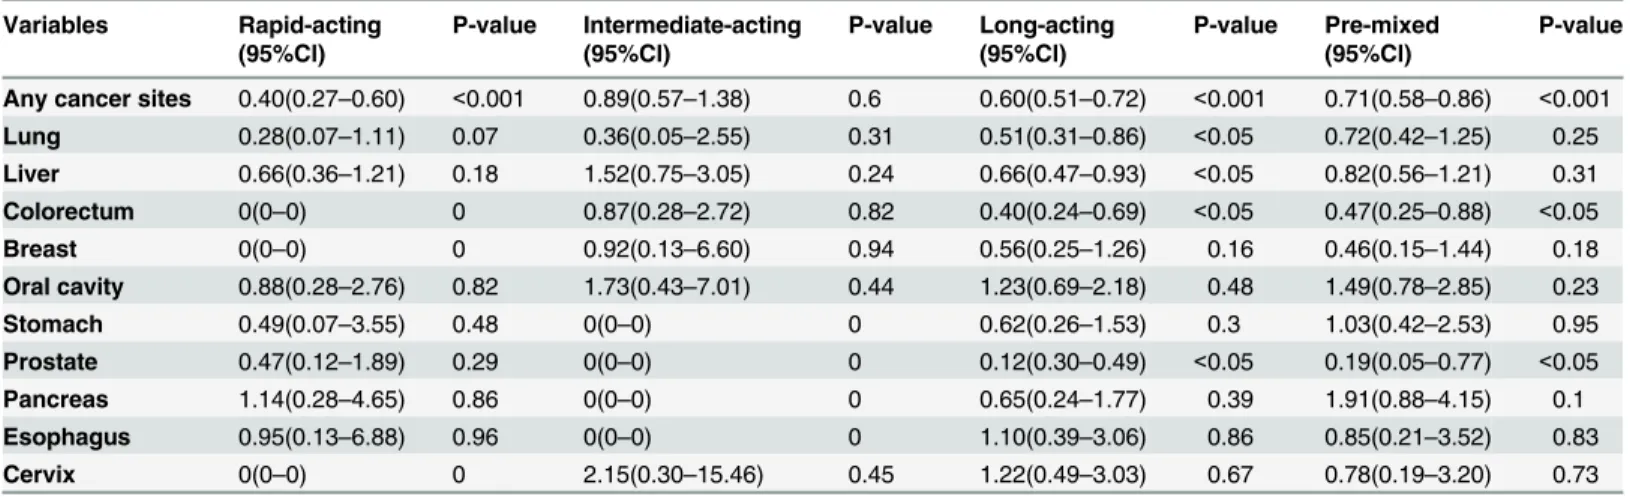 Table 5. Adjusted hazard ratios (AHRs) of cancer in DM patients with and without insulin injection